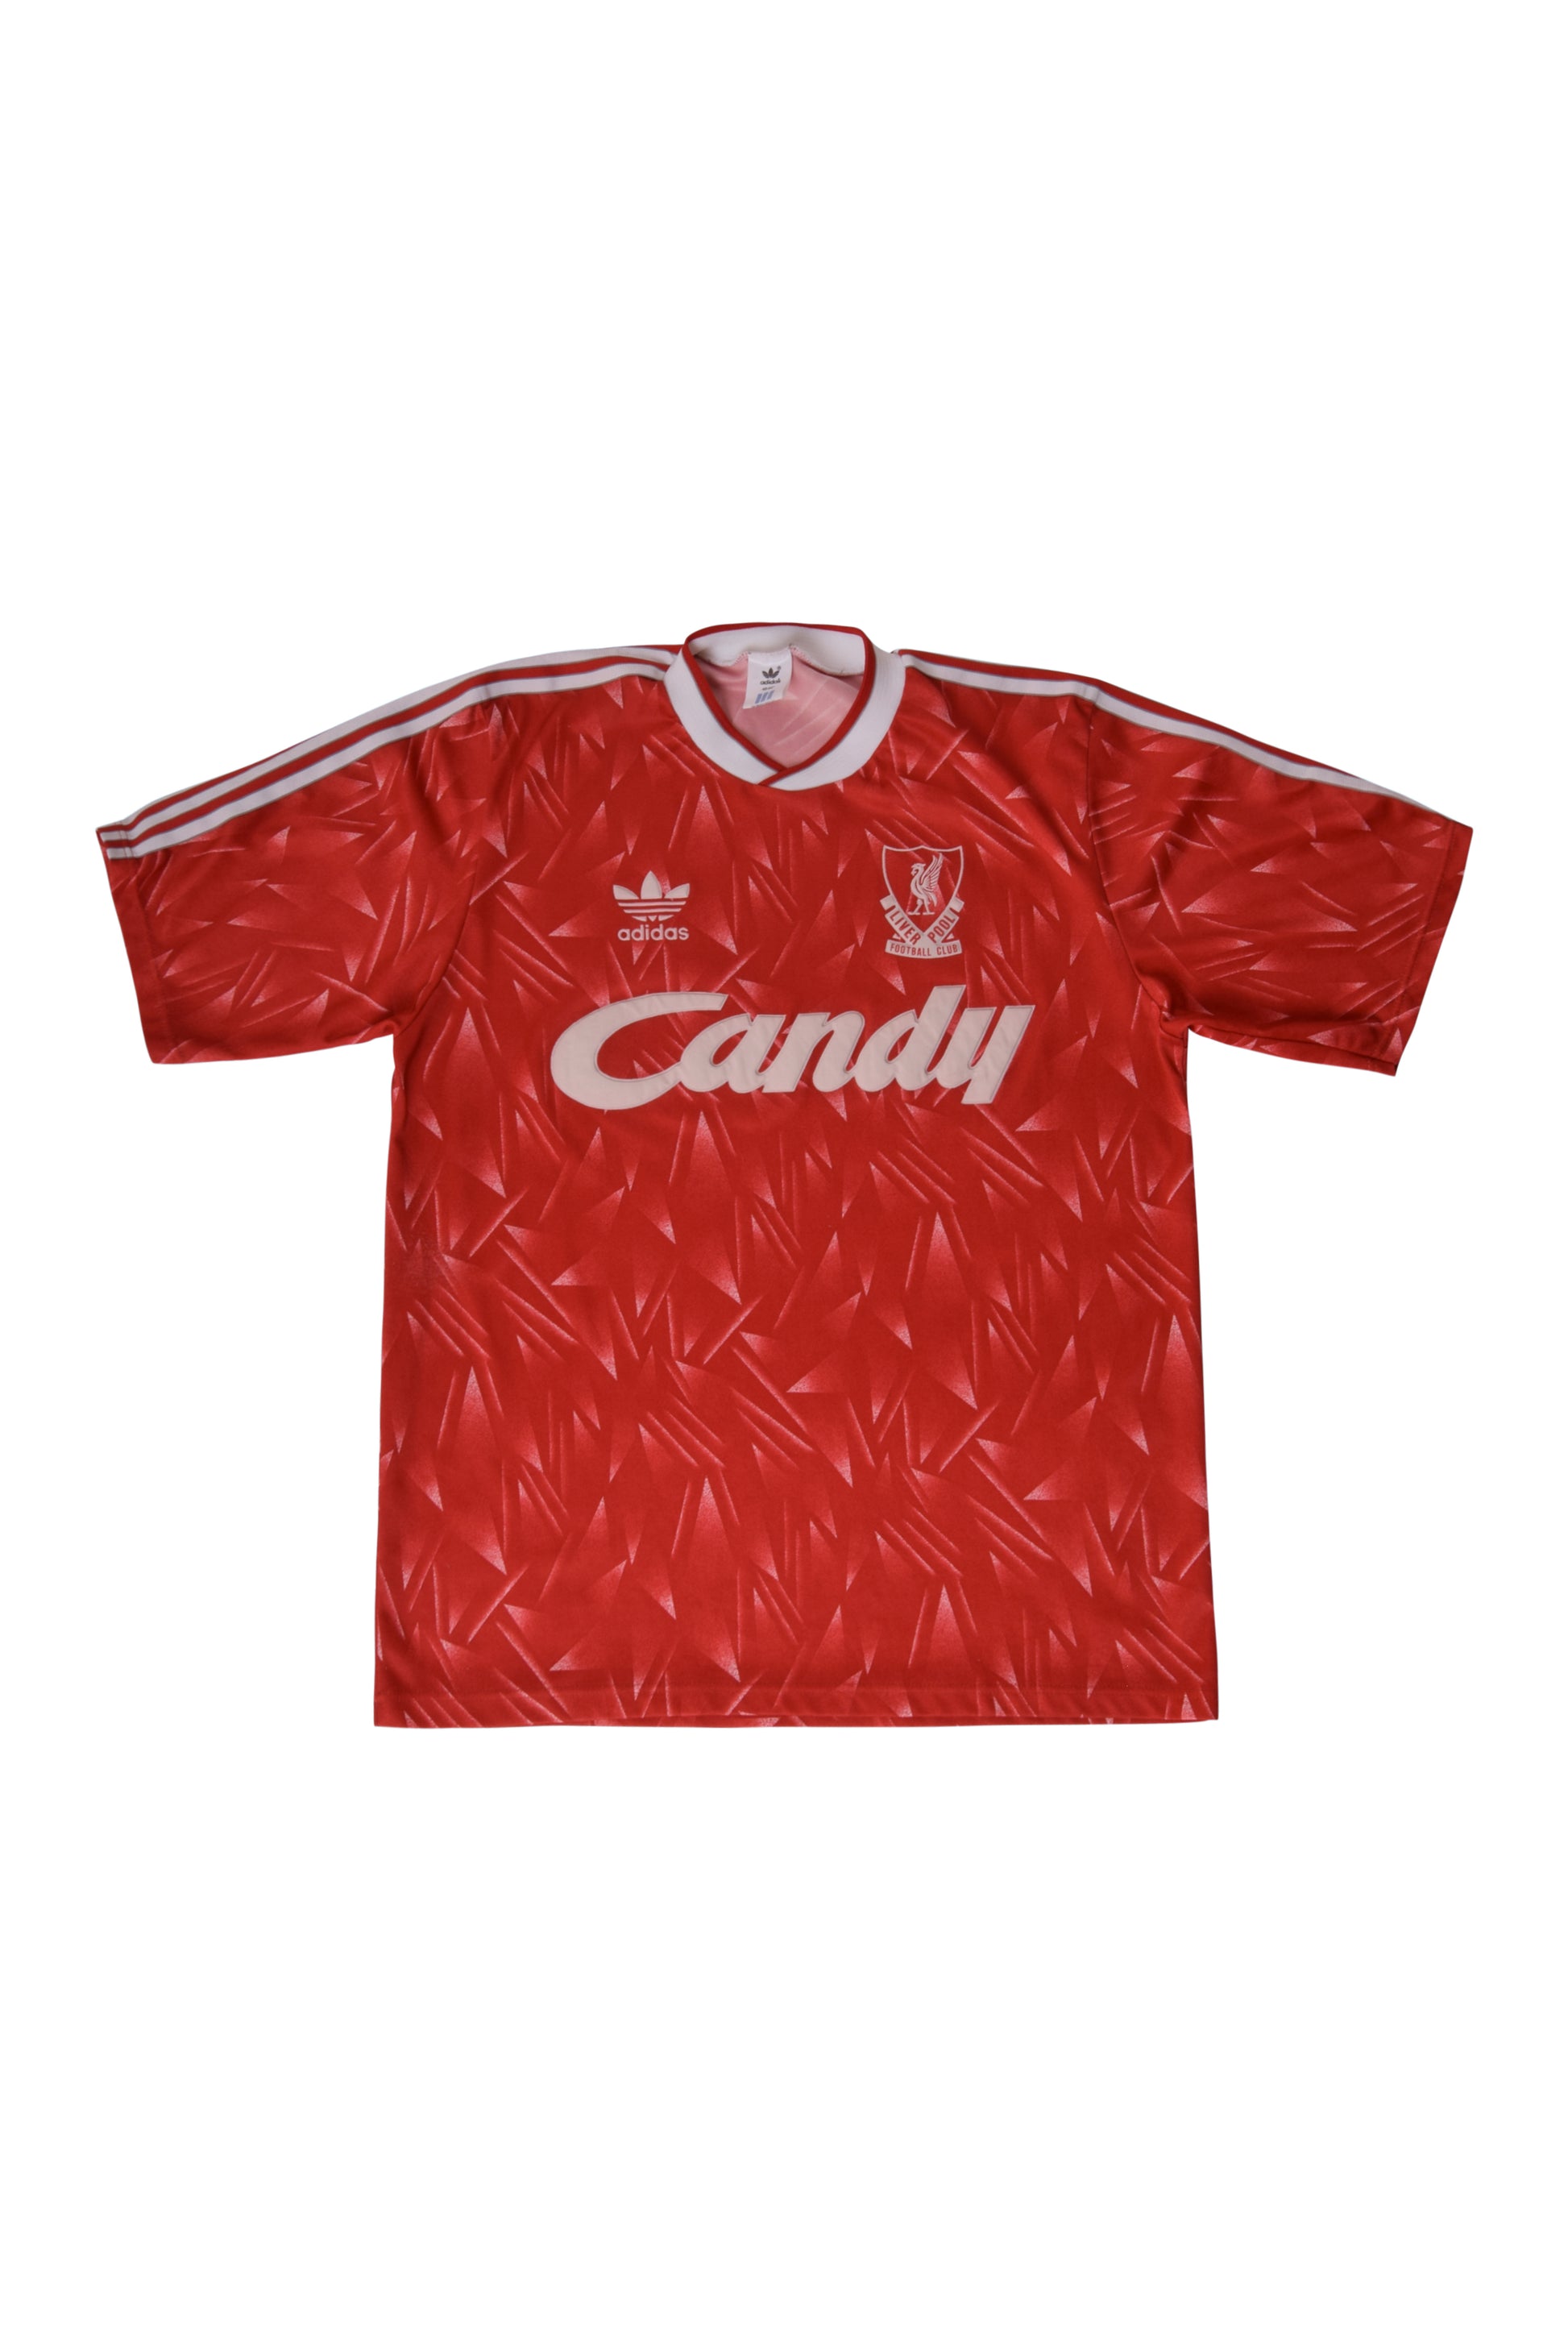 Vintage Liverpool Adidas Home Shirt 1989-1991 Made in UK Size L